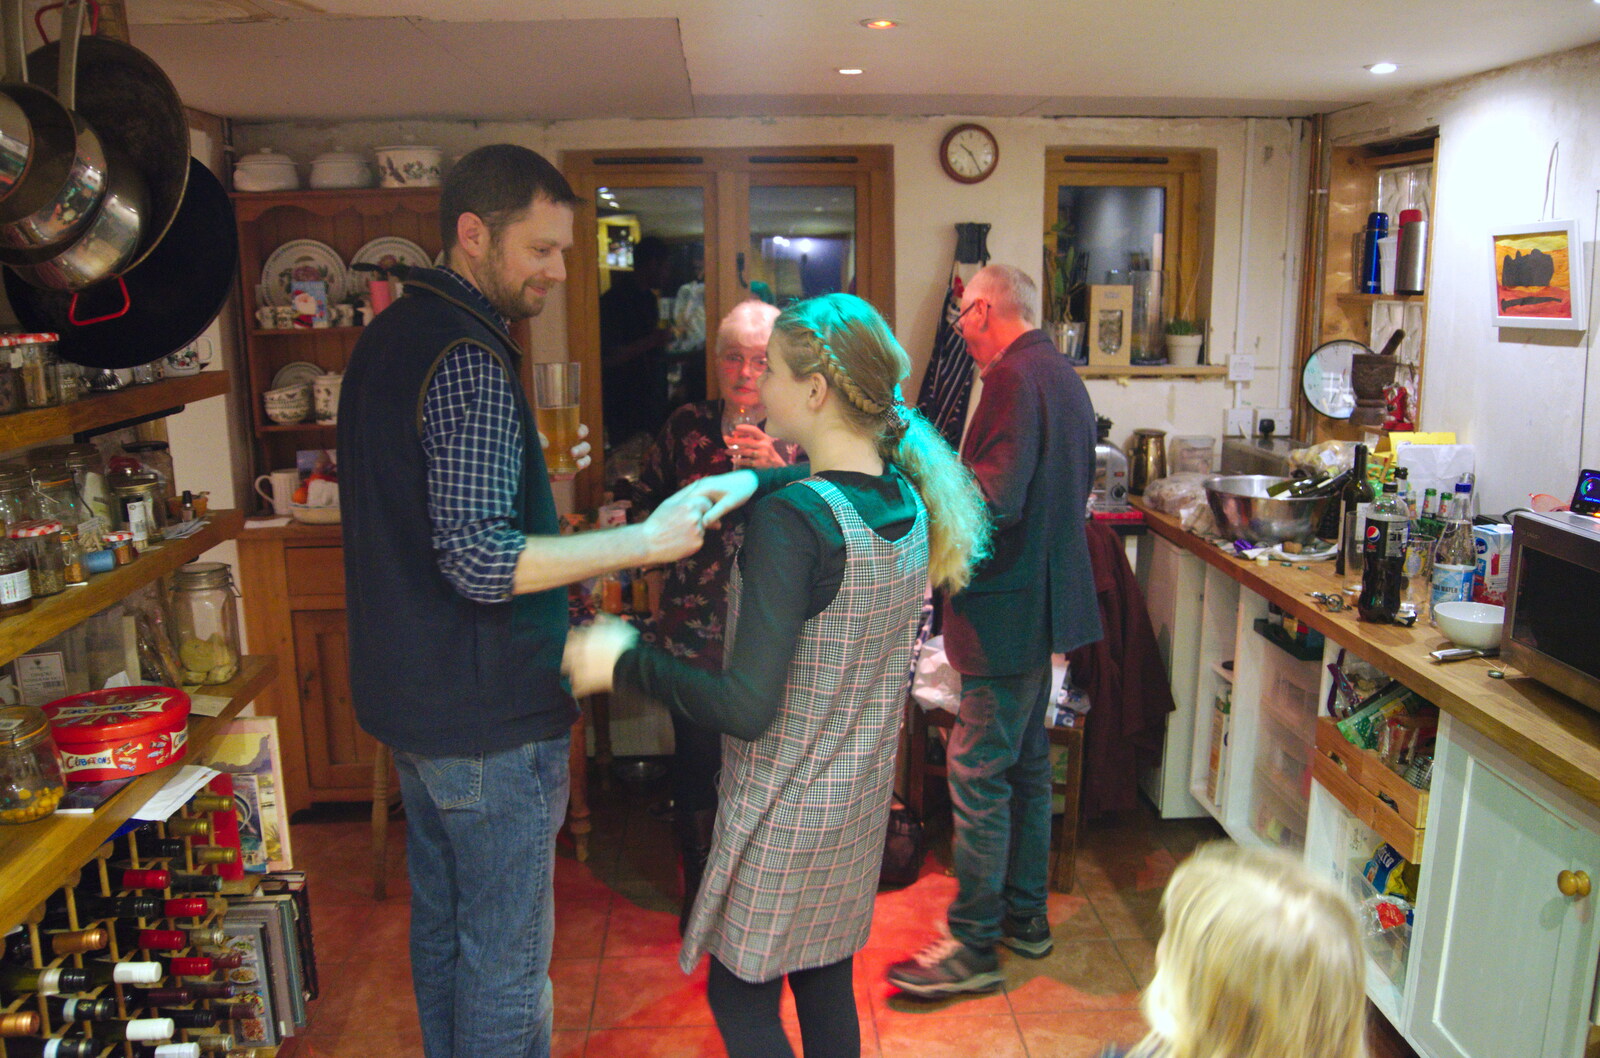 The Boy Phil does some Jessica tormenting from A New Year's Eve Party, Brome, Suffolk - 31st December 2019